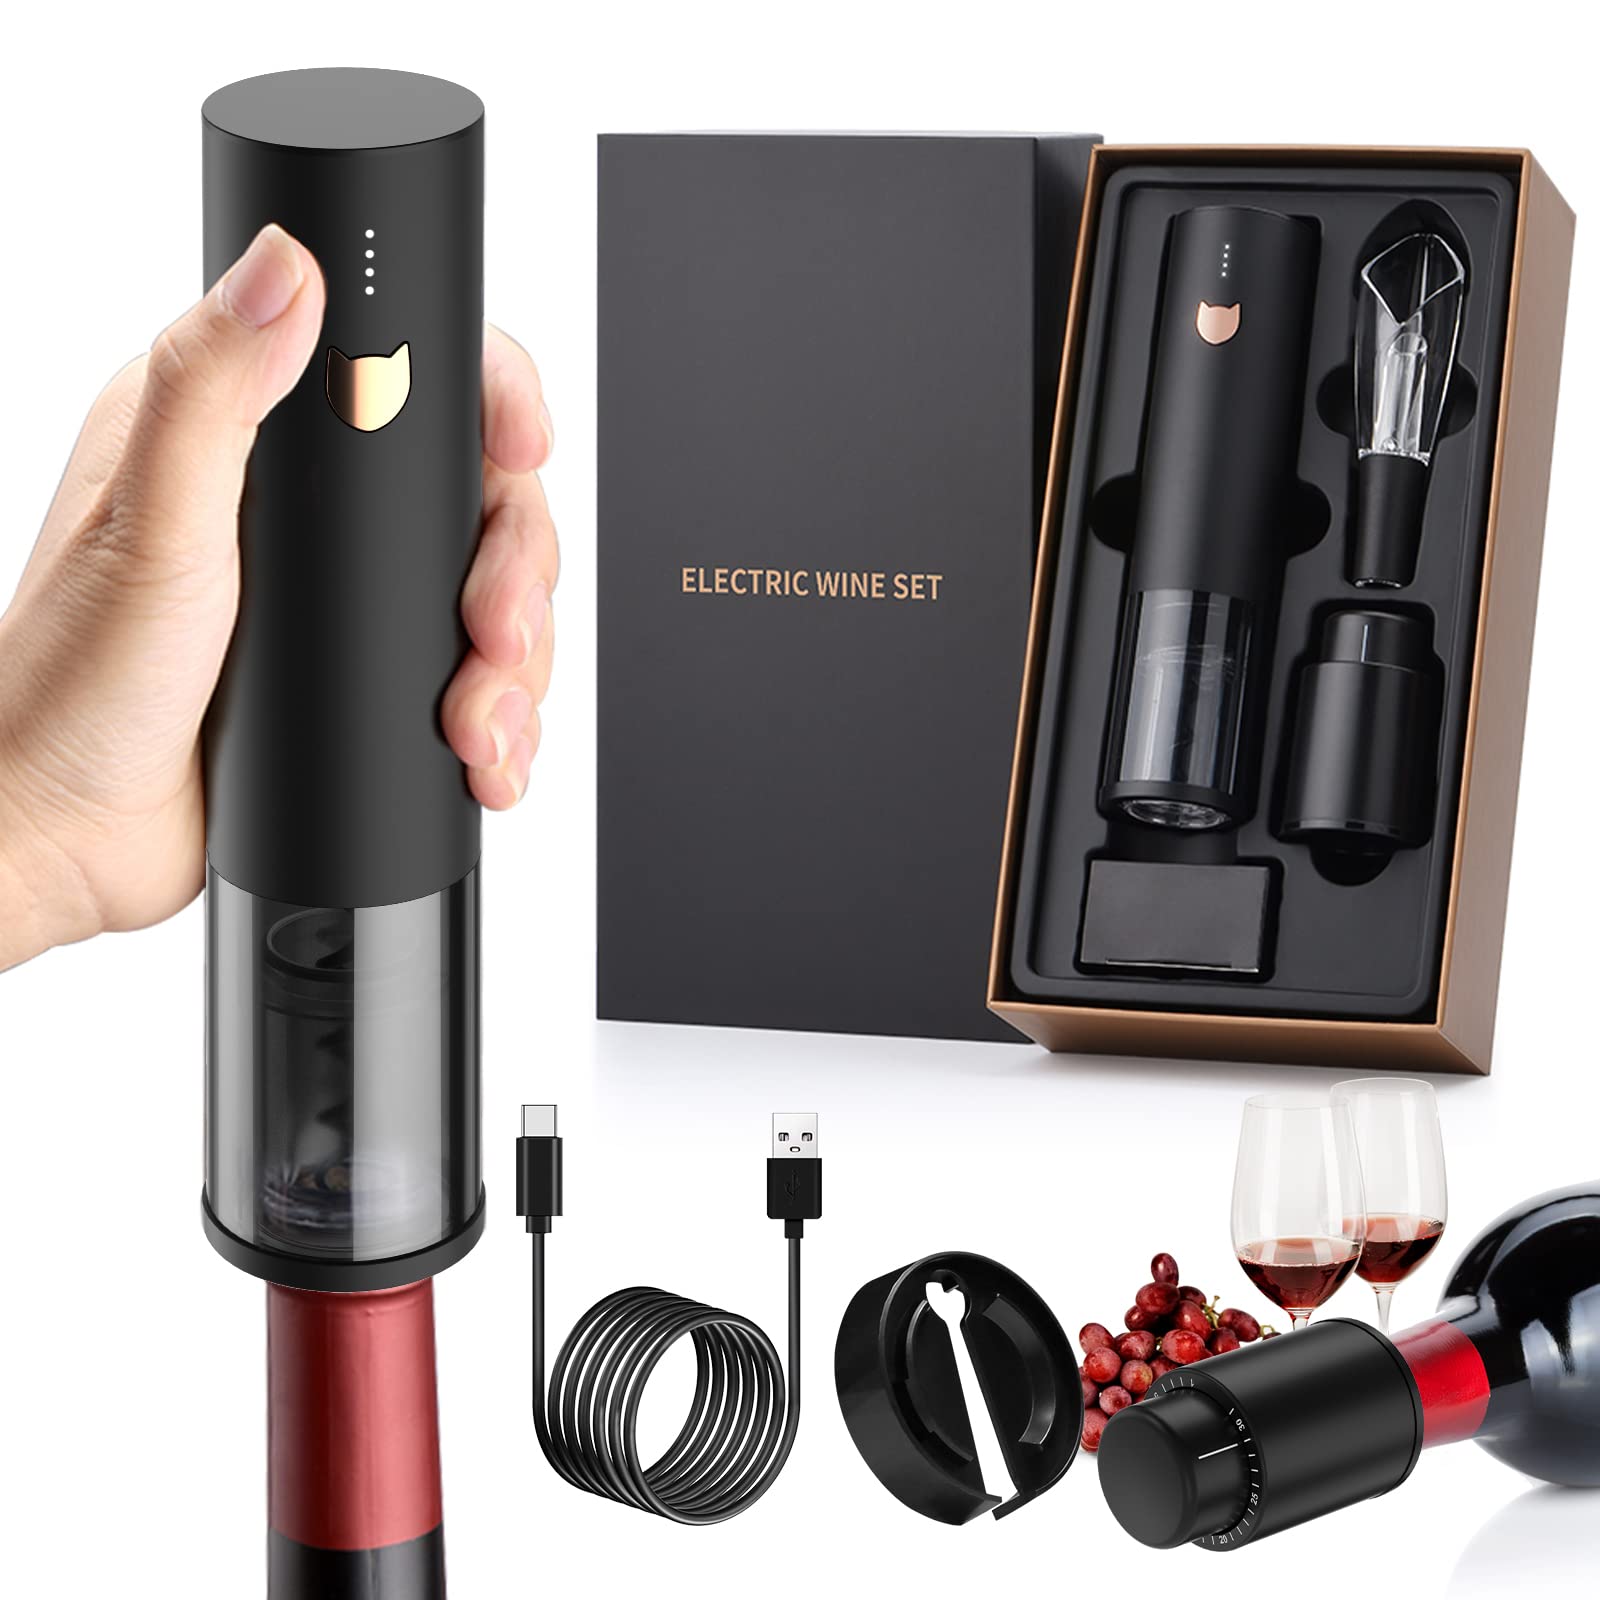 Rocyis Wine gift-Electric Wine Opener, Rocyis Automatic Wine Opener-cordless Electric corkscrew-Wine Bottle Opener Kit with Foil cutter